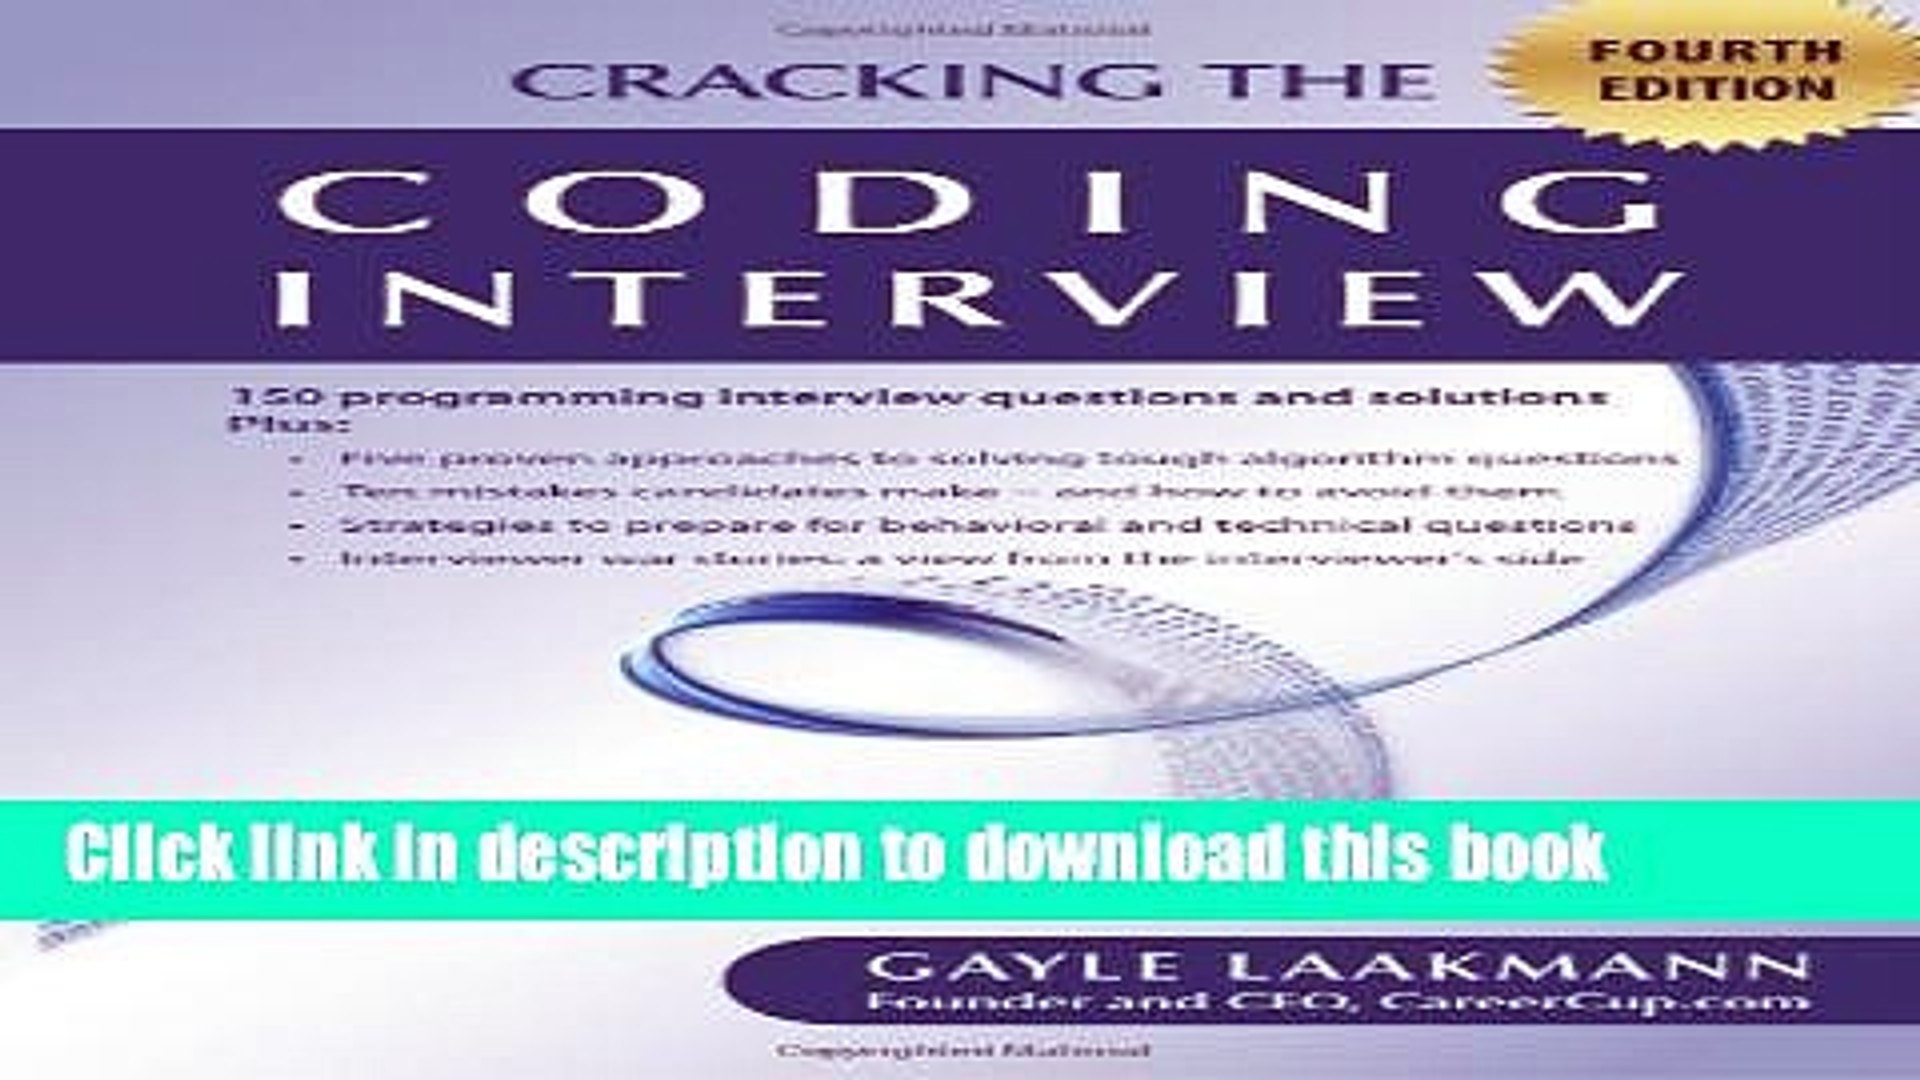 [Popular Books] Cracking the Coding Interview, Fourth Edition Free Online